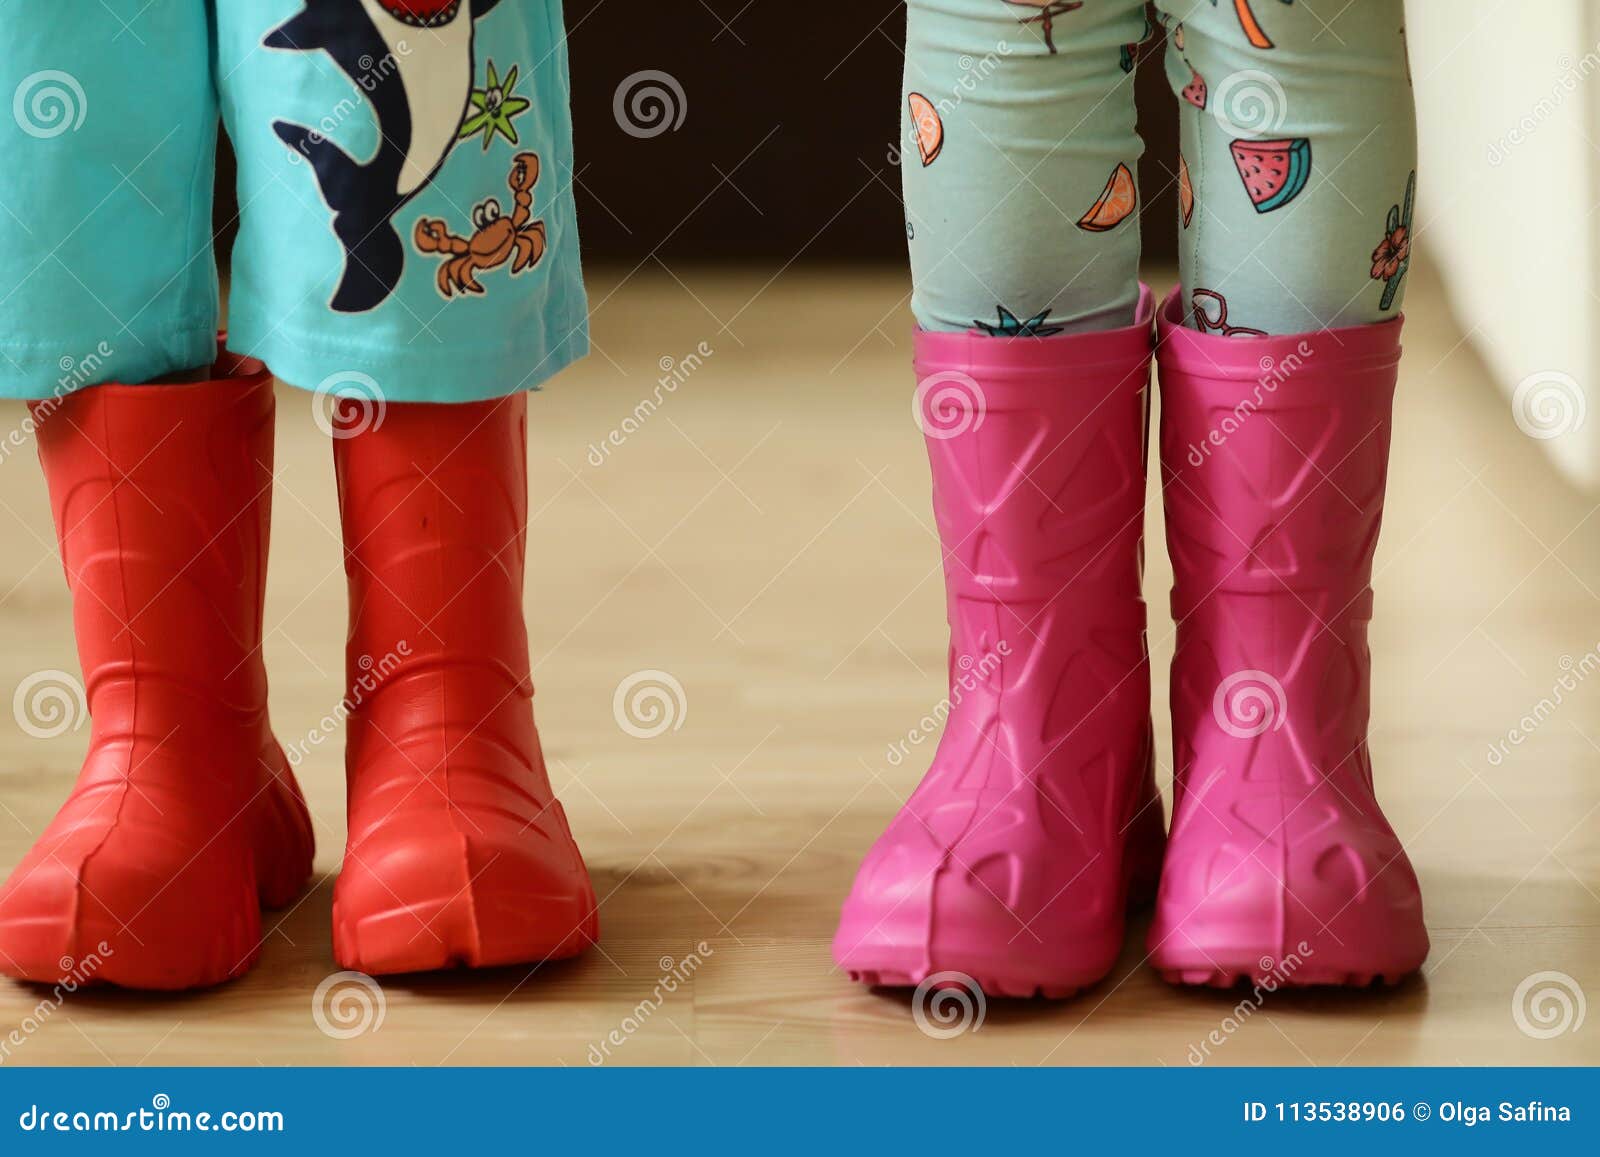 Children in Rainboots Colourful Wear Pretty Cool and Umbrellas Stock ...